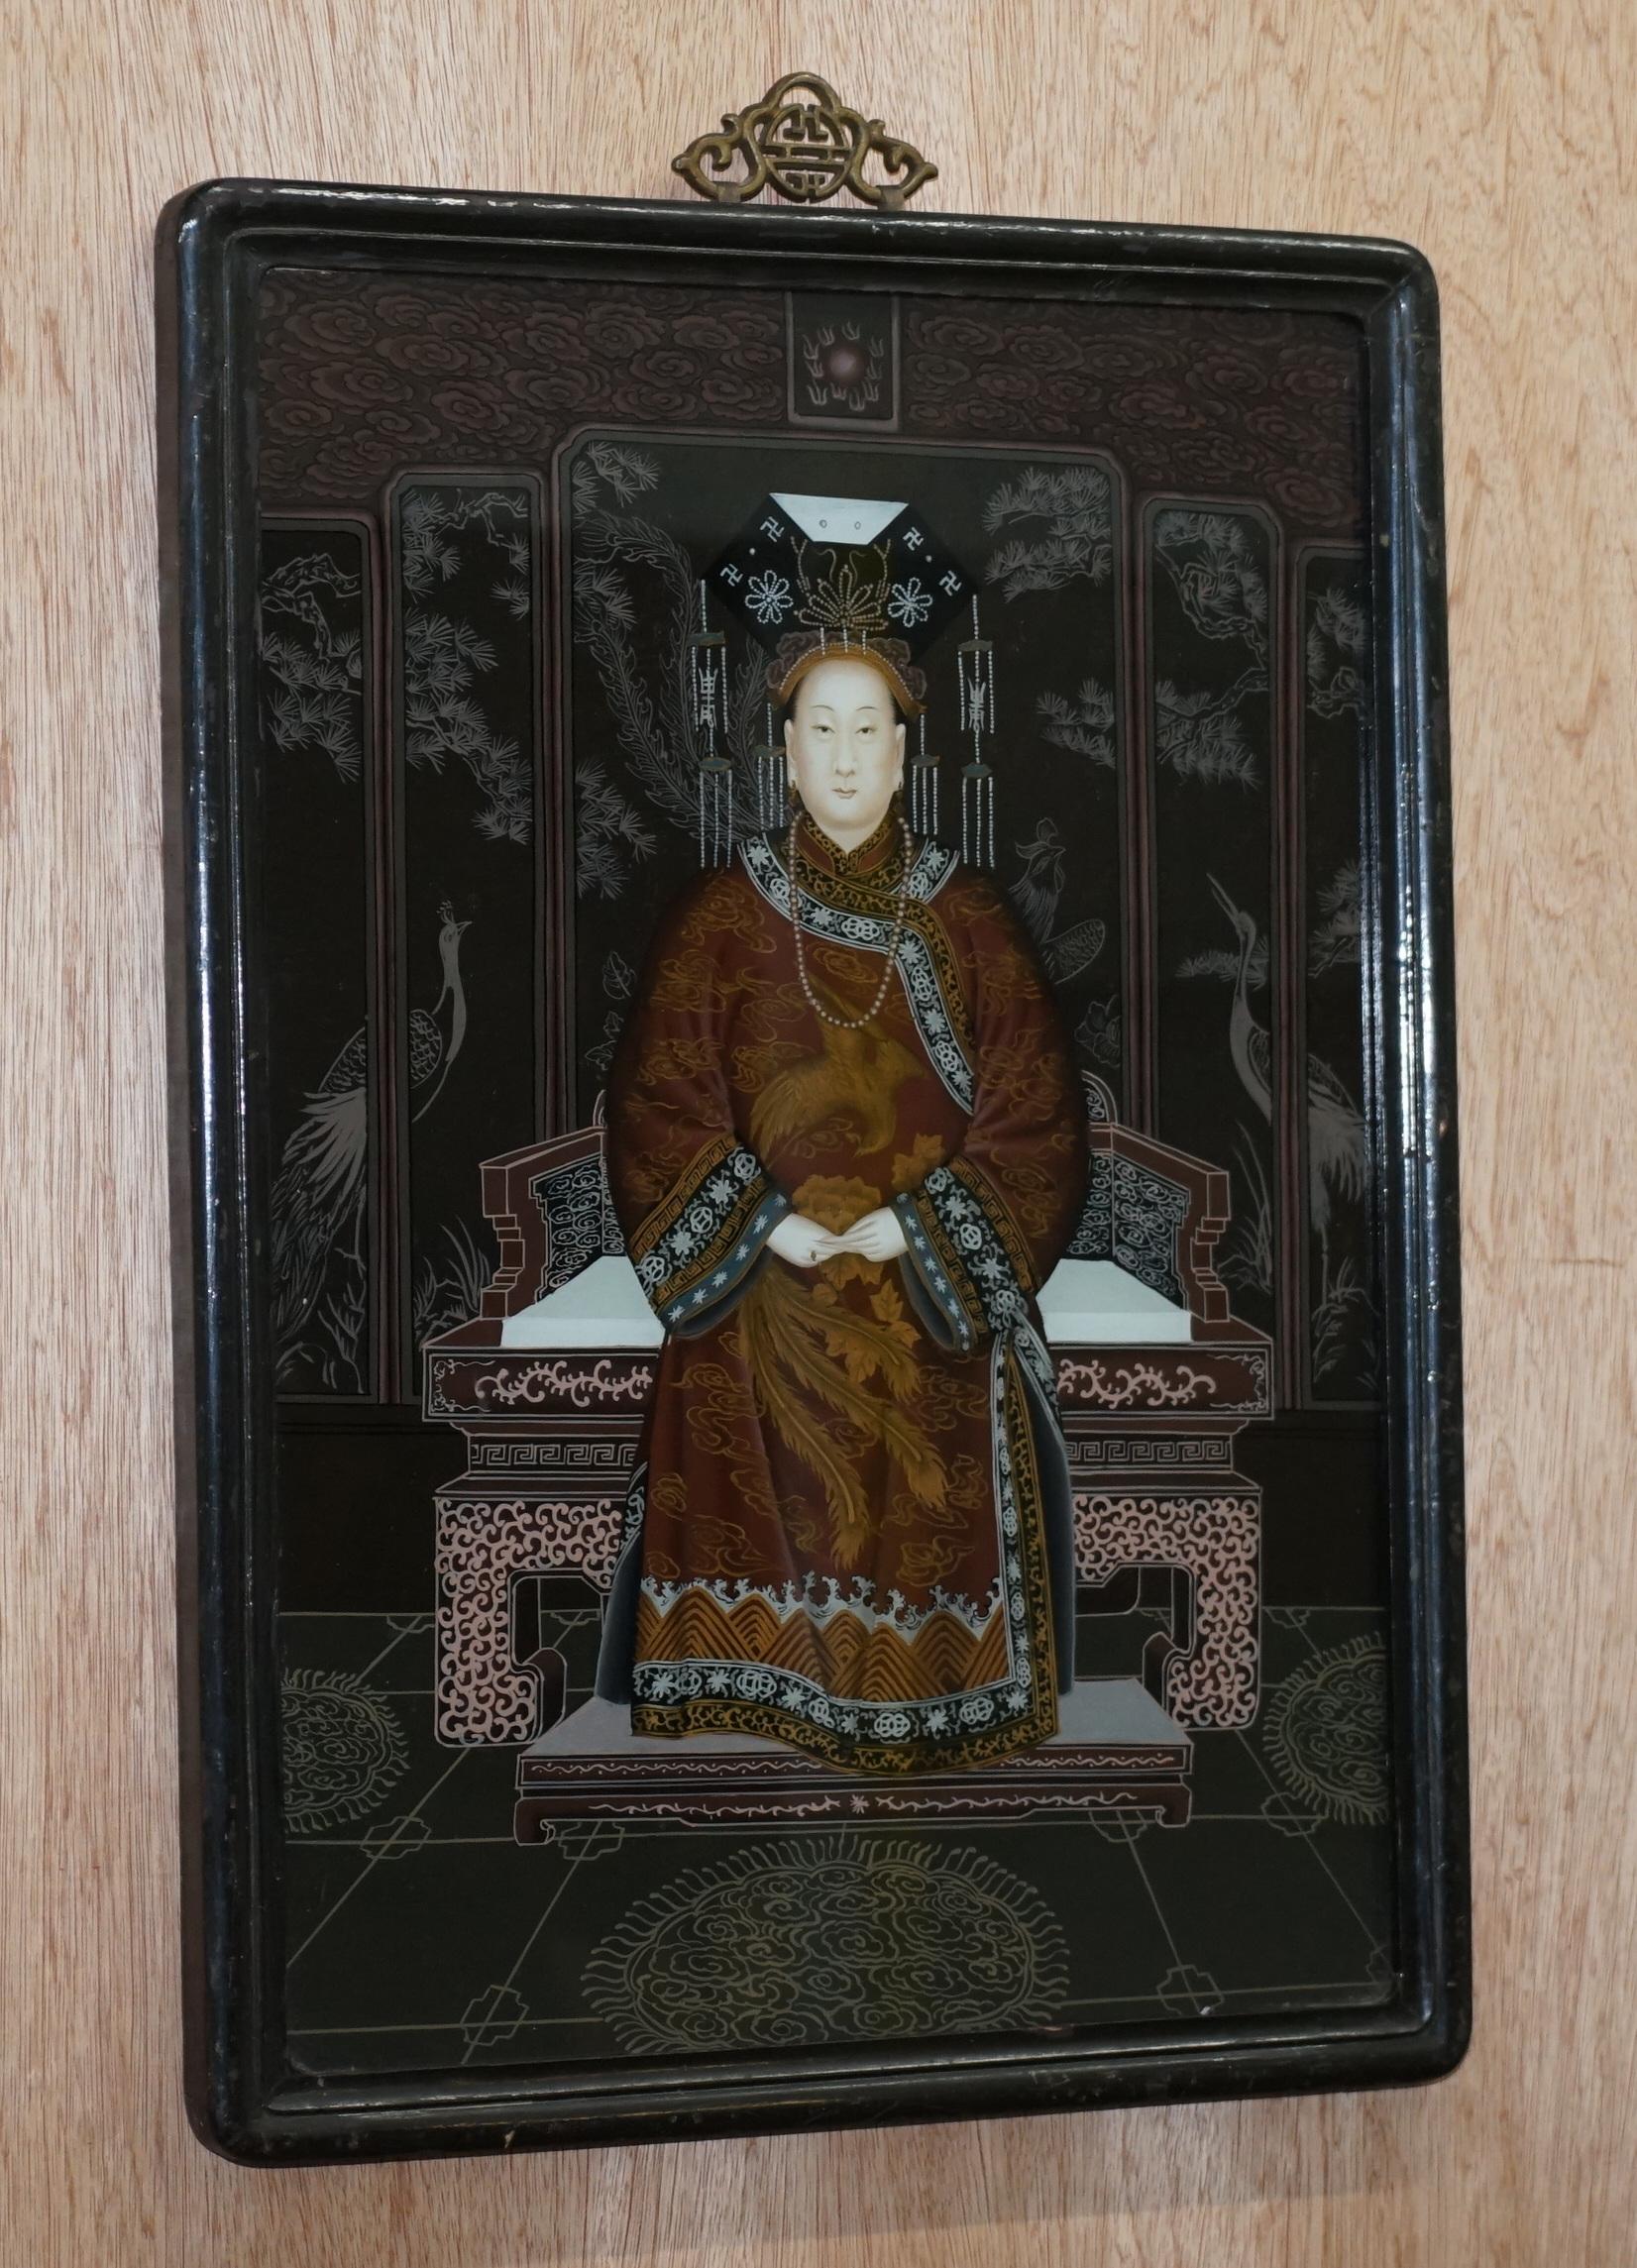 We are delighted to offer for sale this very rare Chinese ancestral portrait which has been hand painted on glass 

I have no idea exactly how this was made but it looks complicated, it seems to be engraved glass which has been hand painted